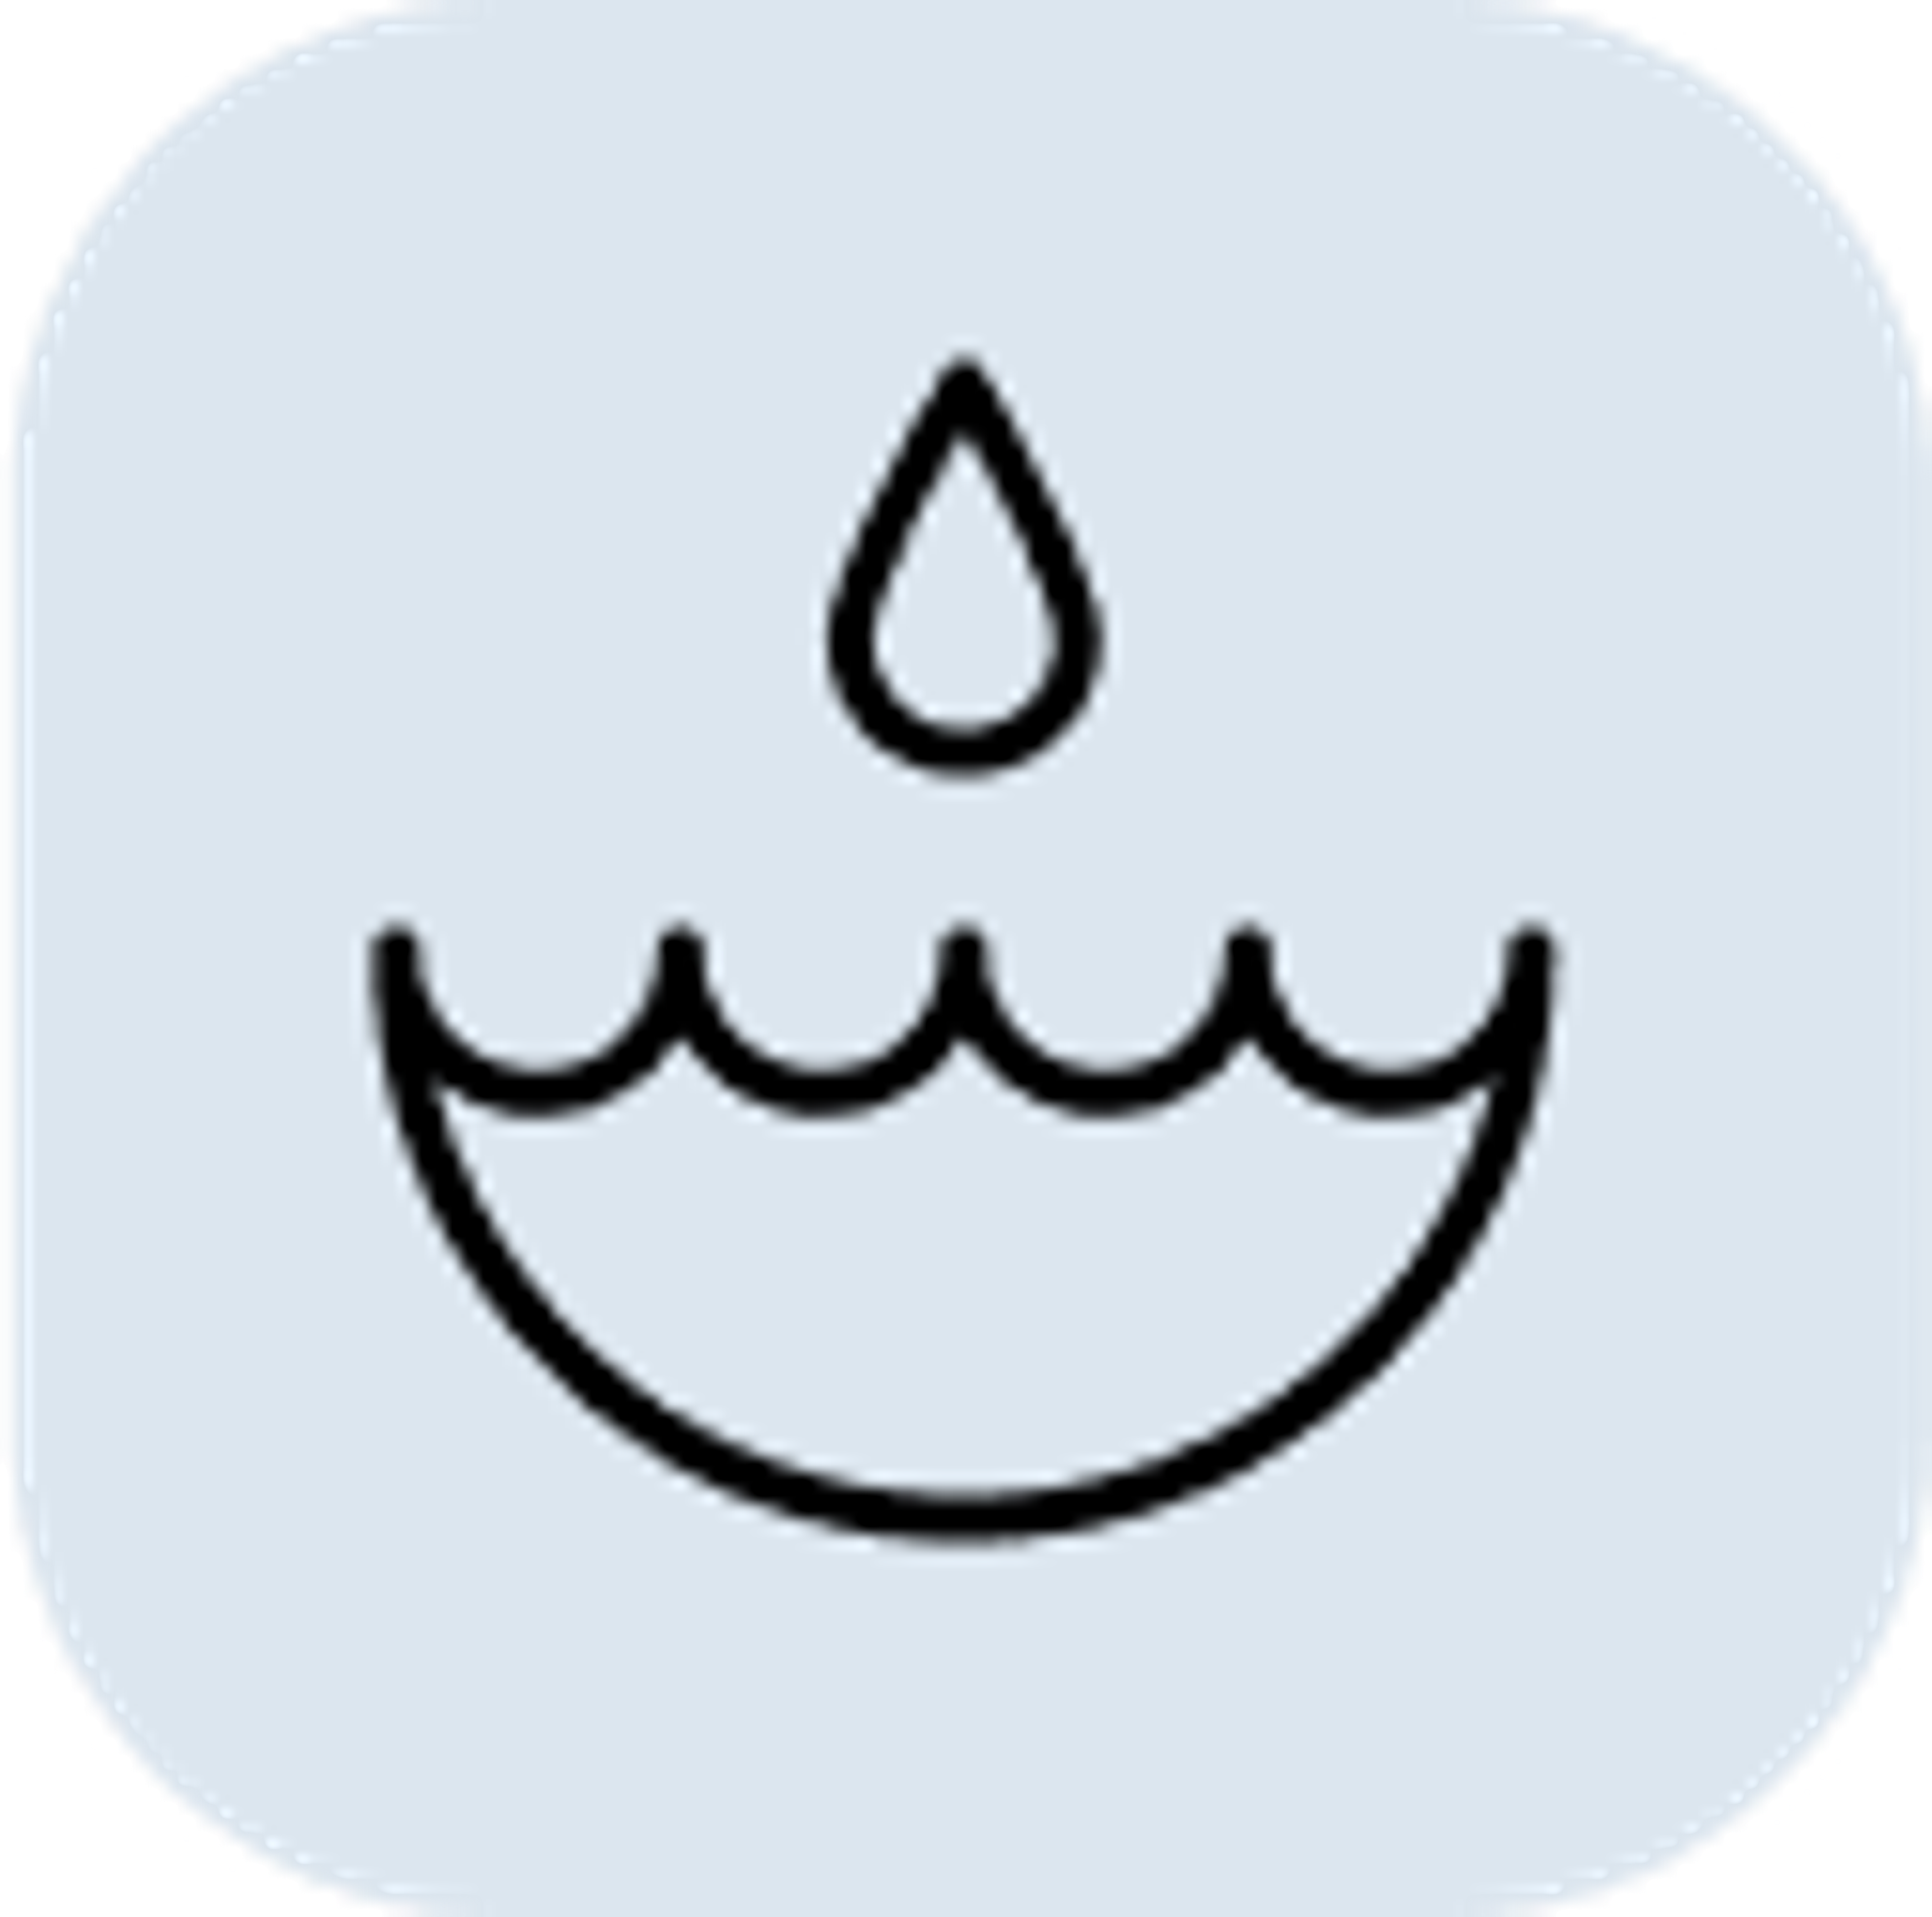 icon of water